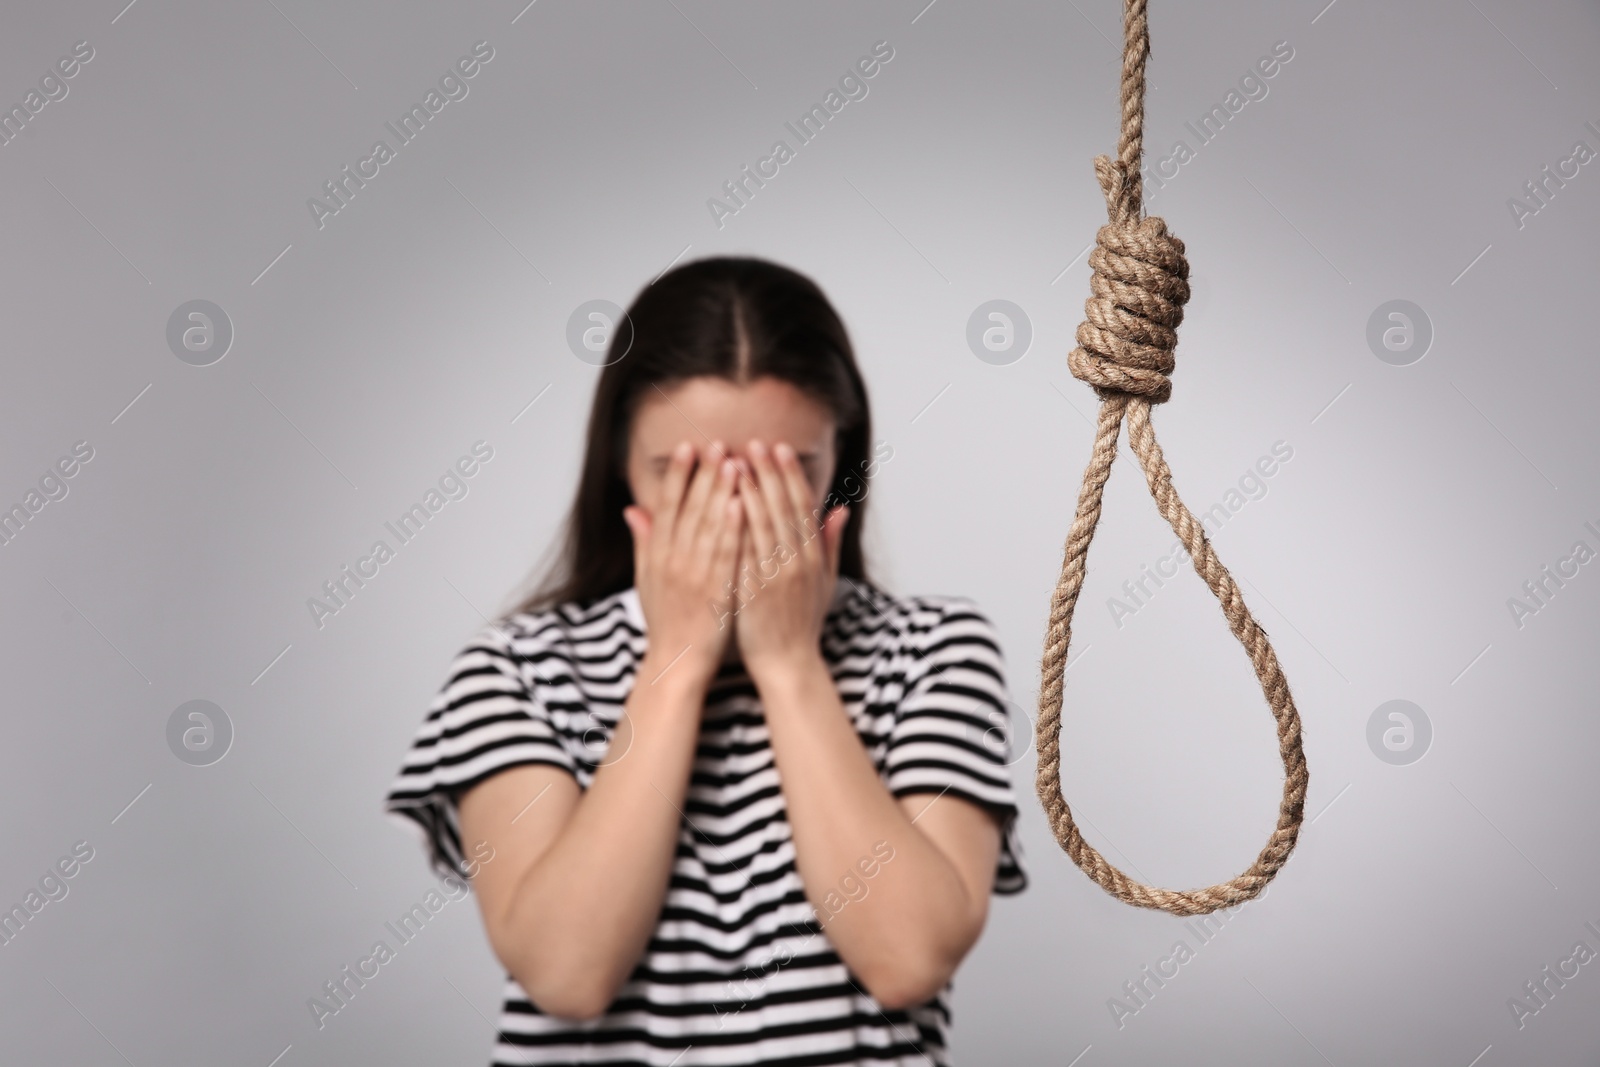 Photo of Depressed woman crying near rope noose on light grey background